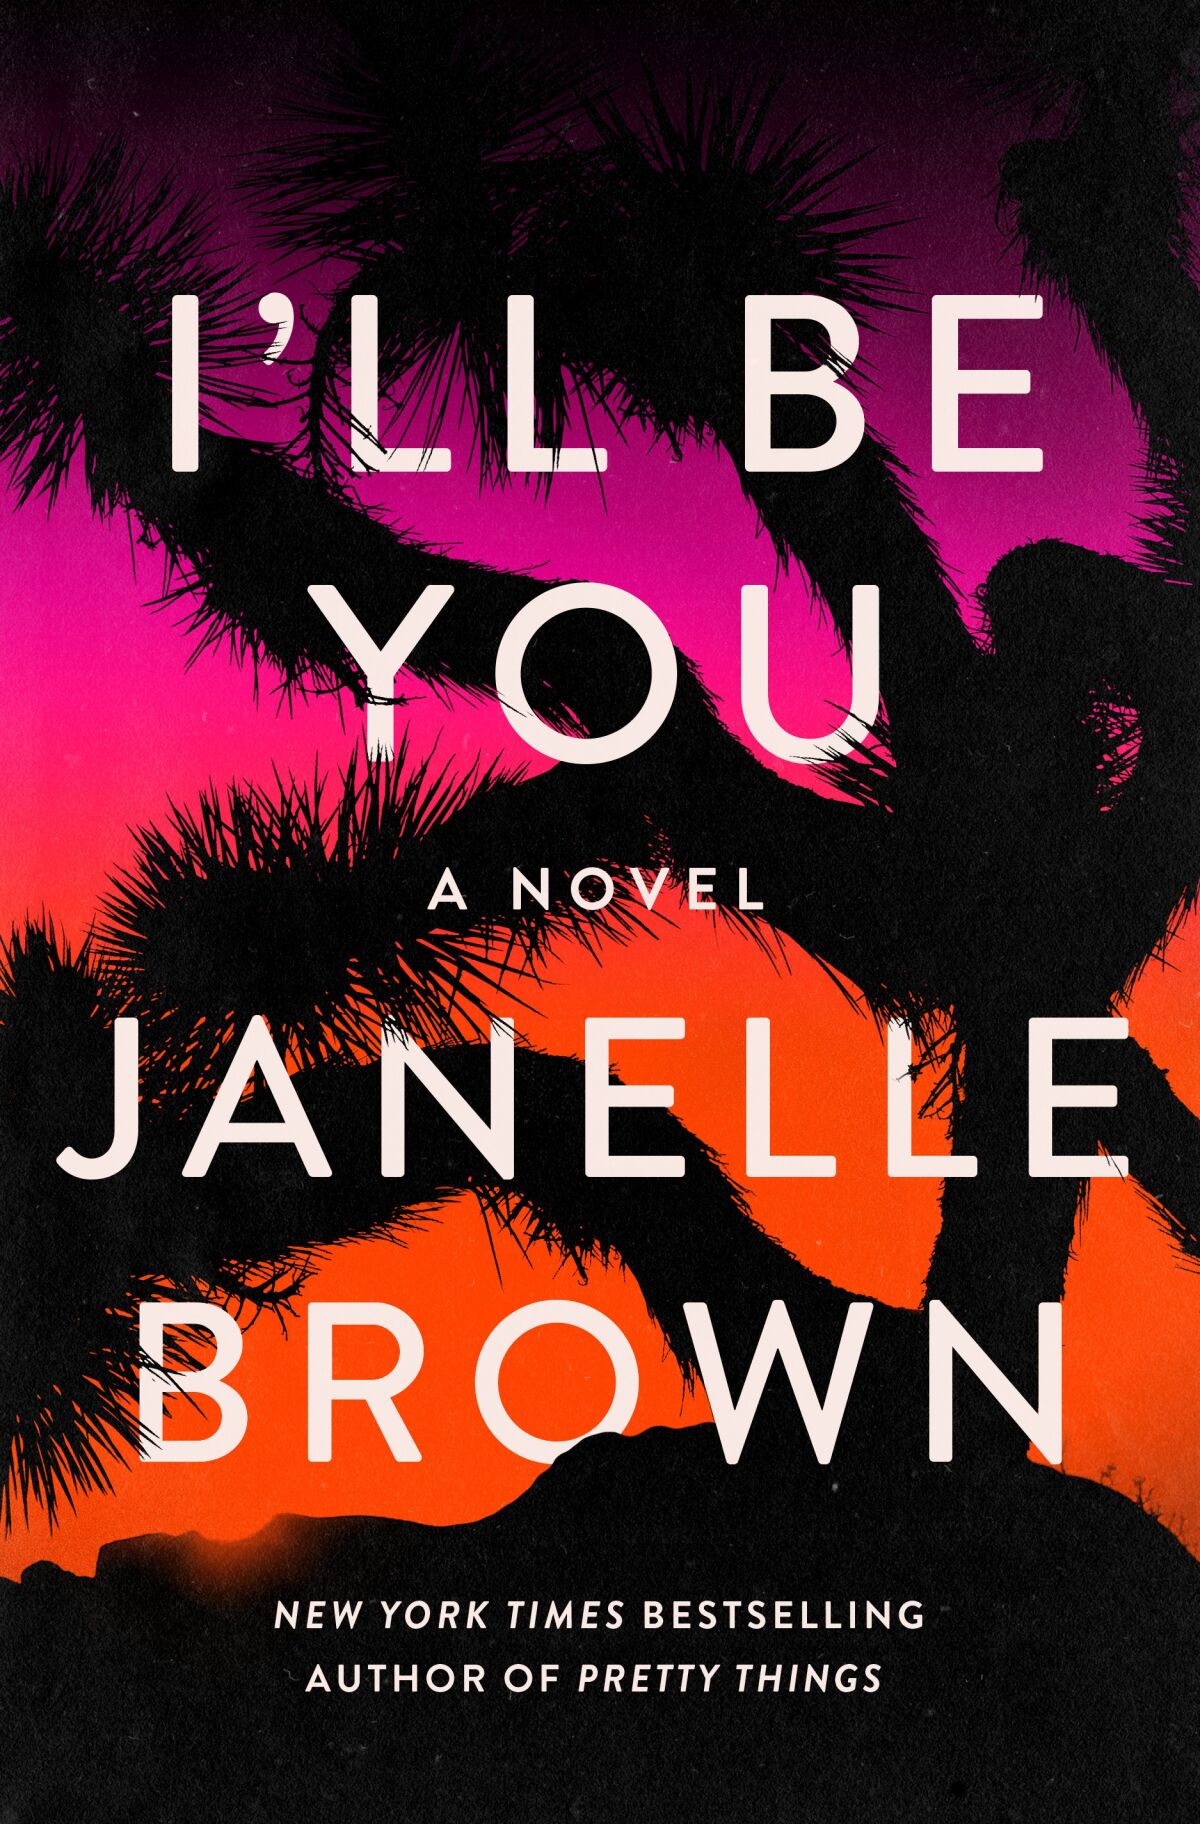 Book cover "I'll be You" by Janelle Brown has pink and orange background and silhouette of a palm tree 